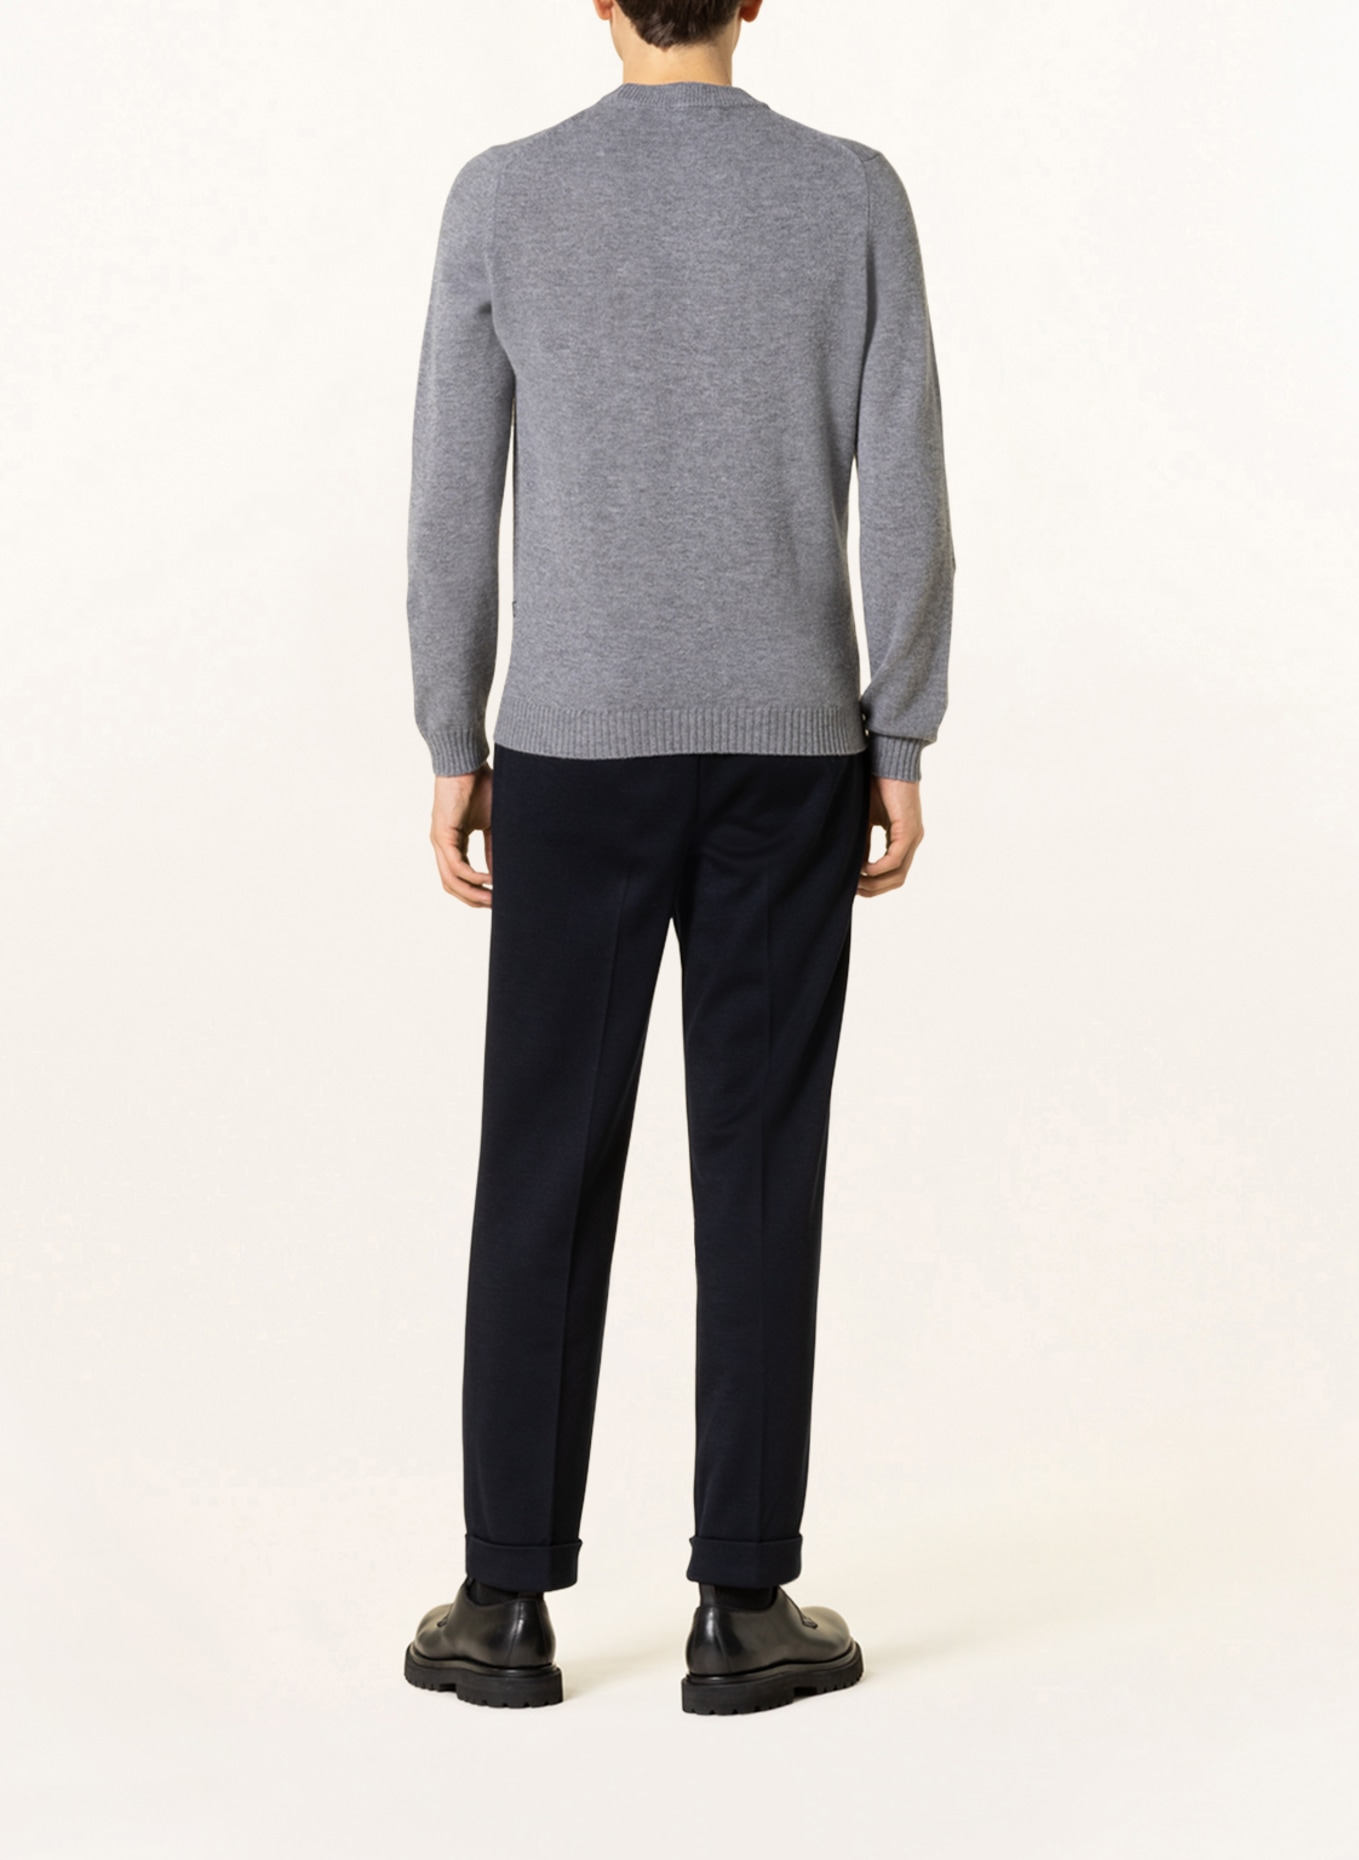 MAERZ MUENCHEN Sweater, Color: GRAY (Image 3)